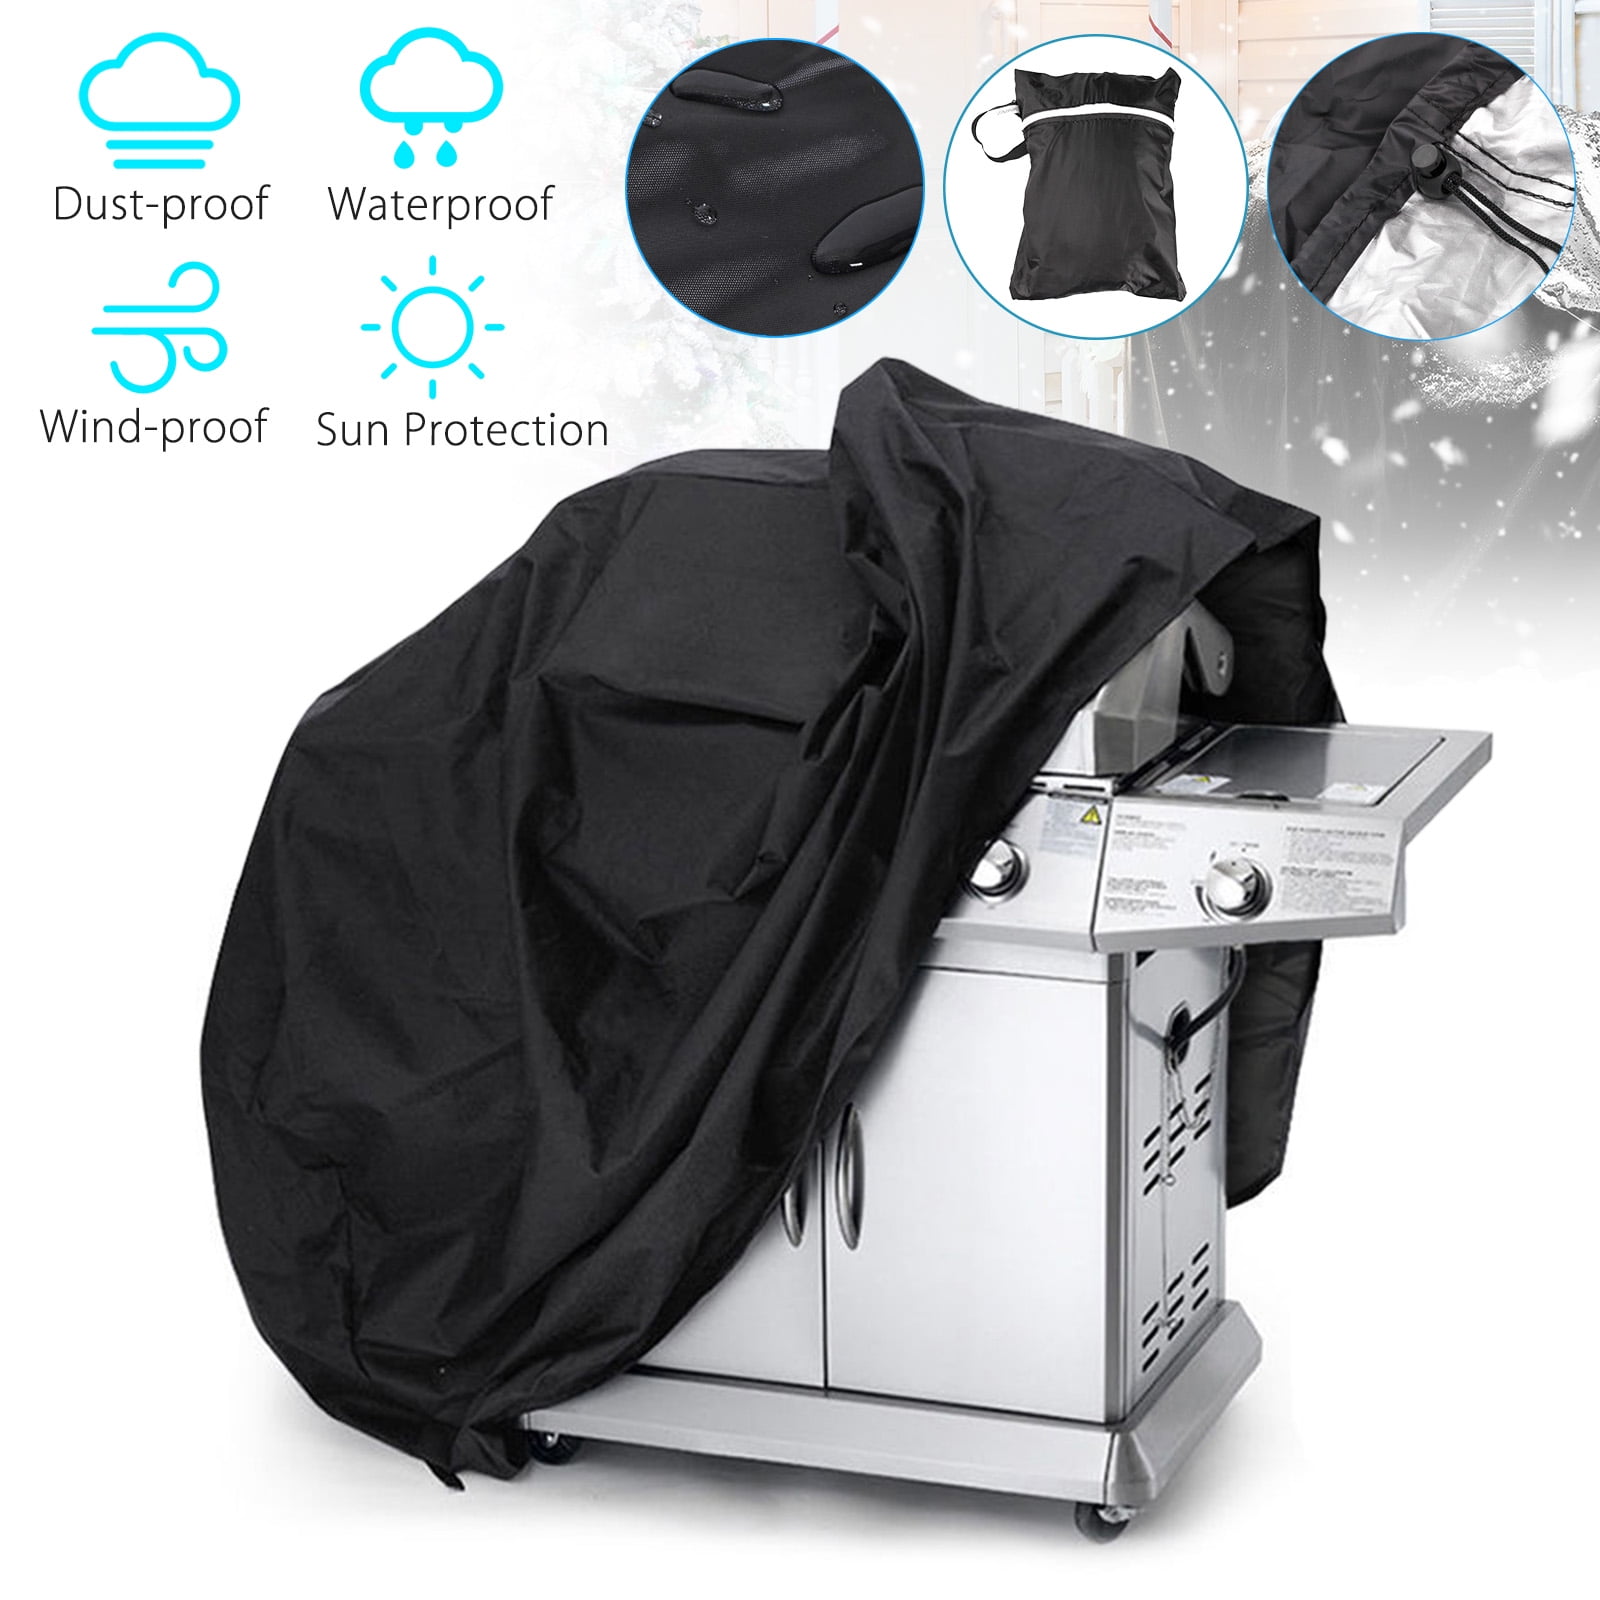 Gas BBQ Cover Grill Accessory Useful Cloth Cover Non-toxic Outdoor Supplies N3 